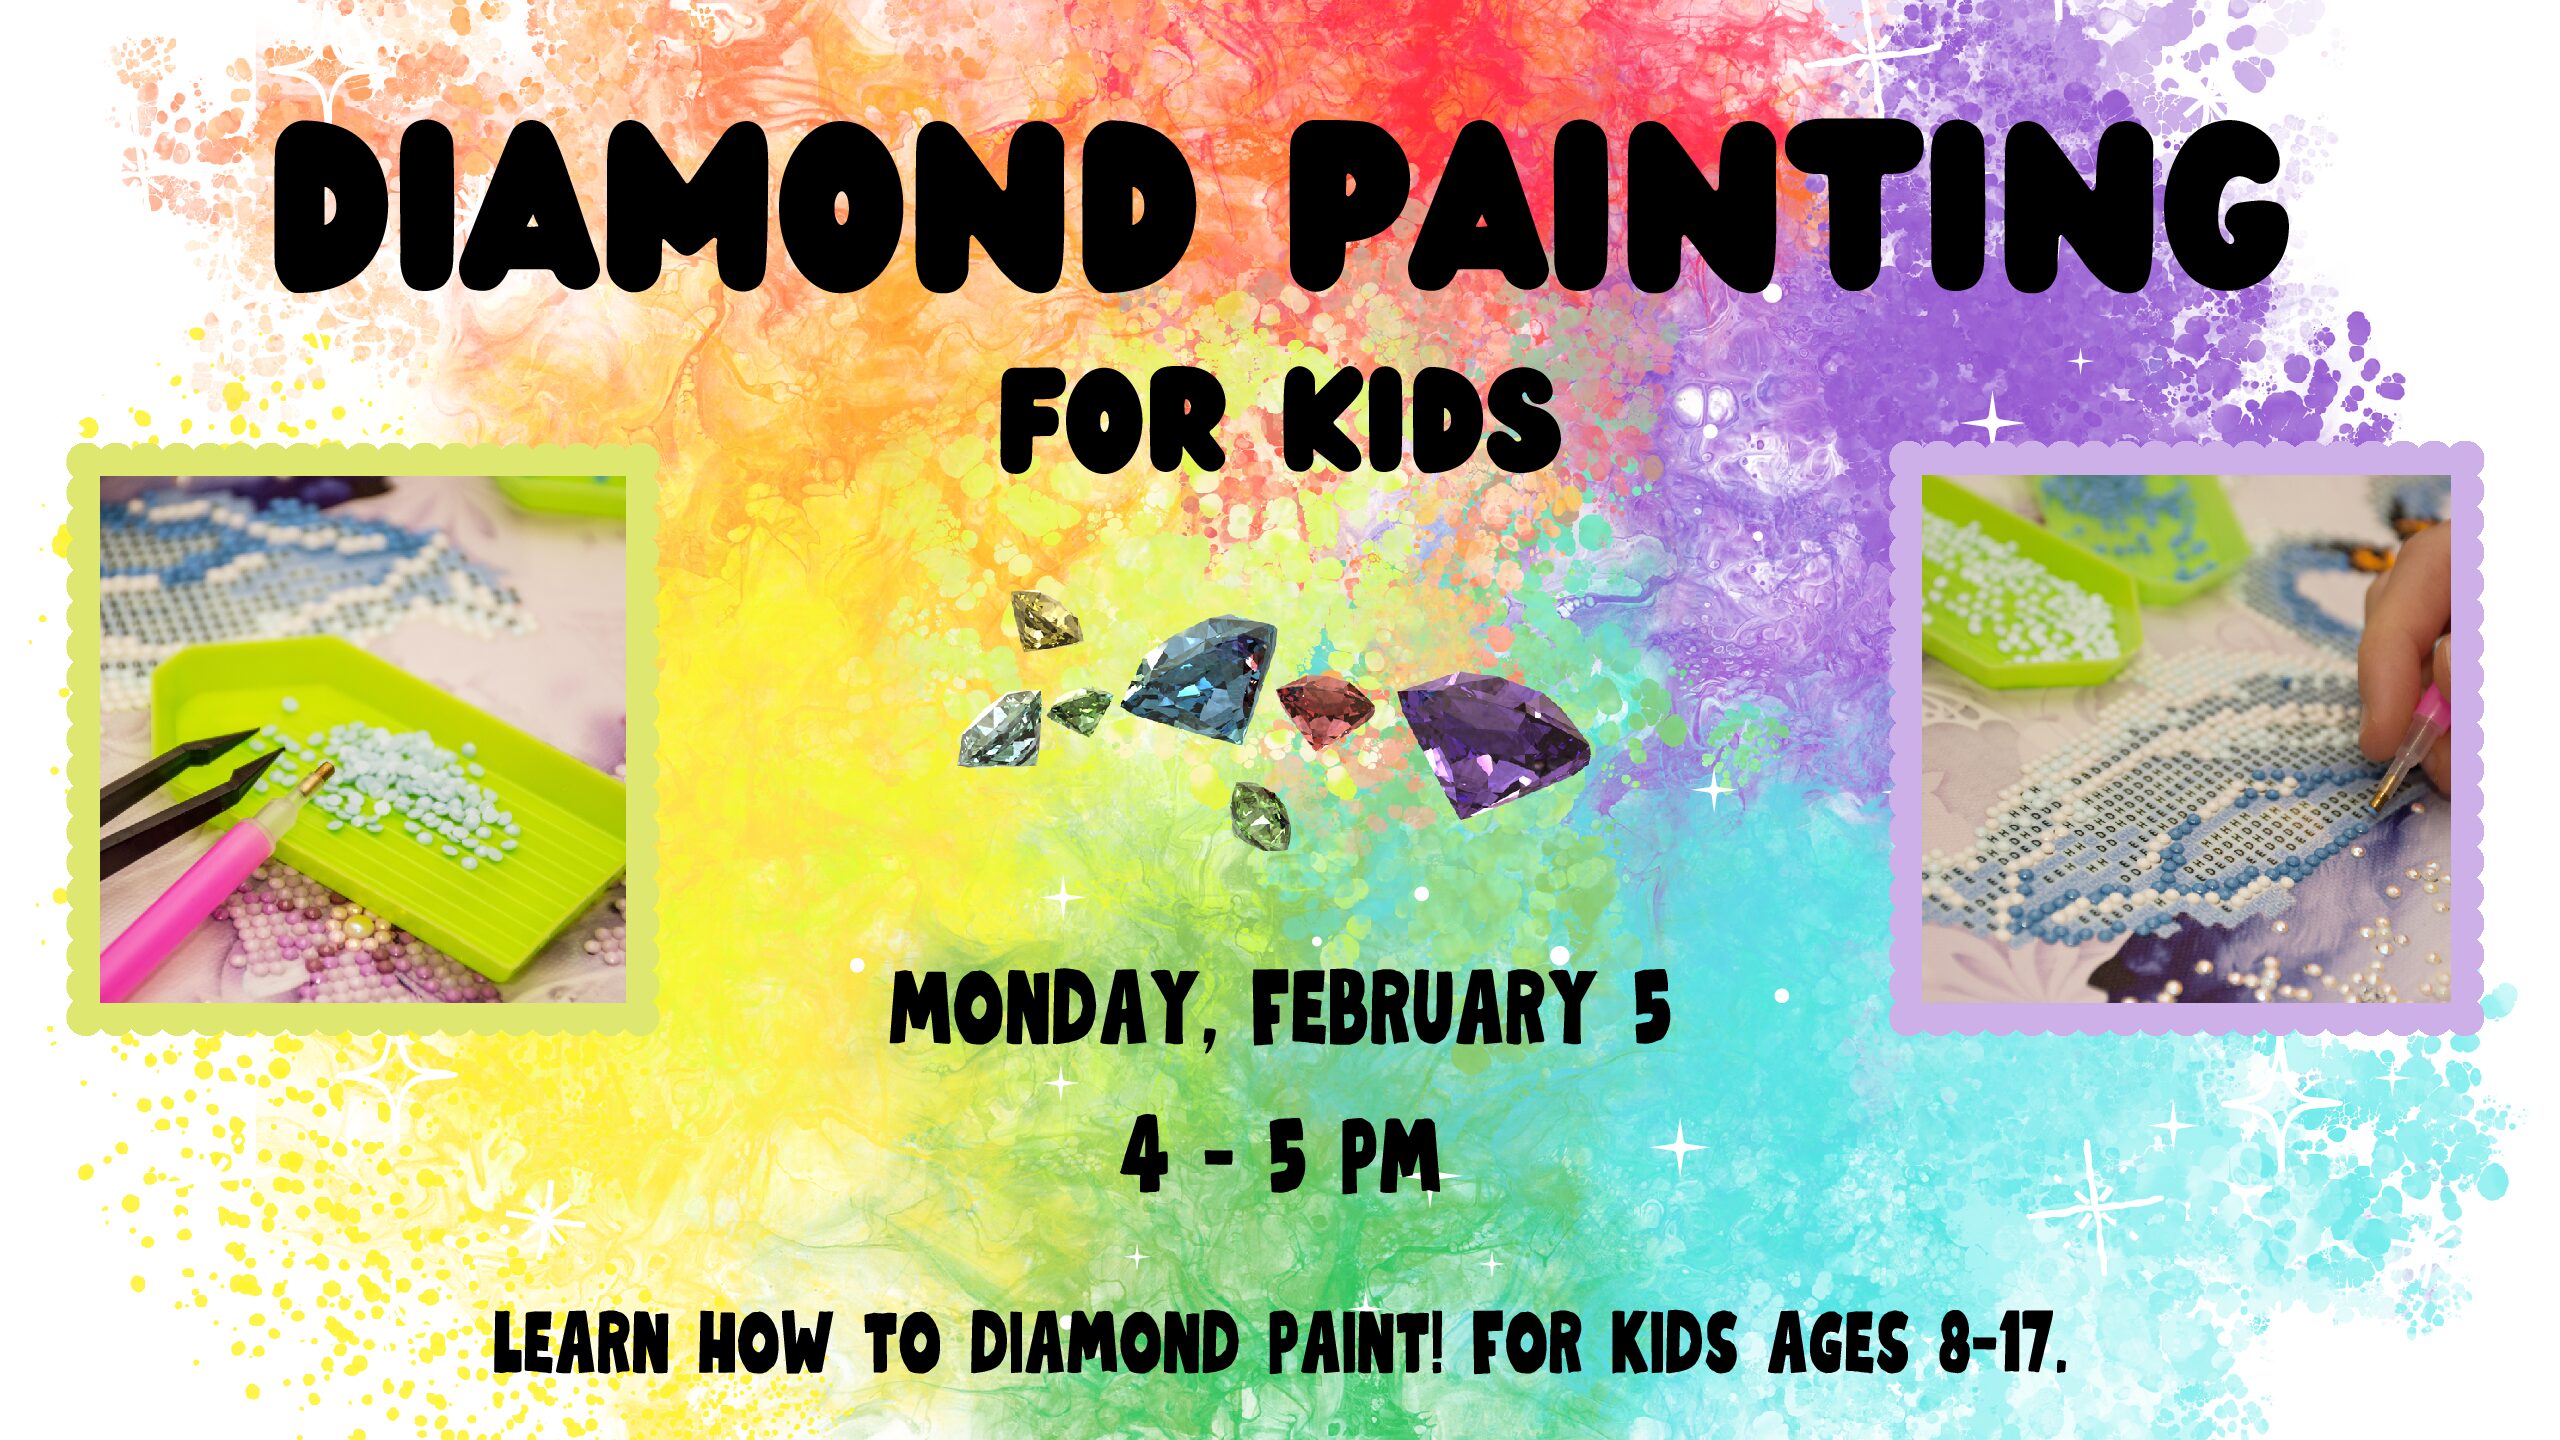 Diamond Painting For Kids - Michigan City Public Library